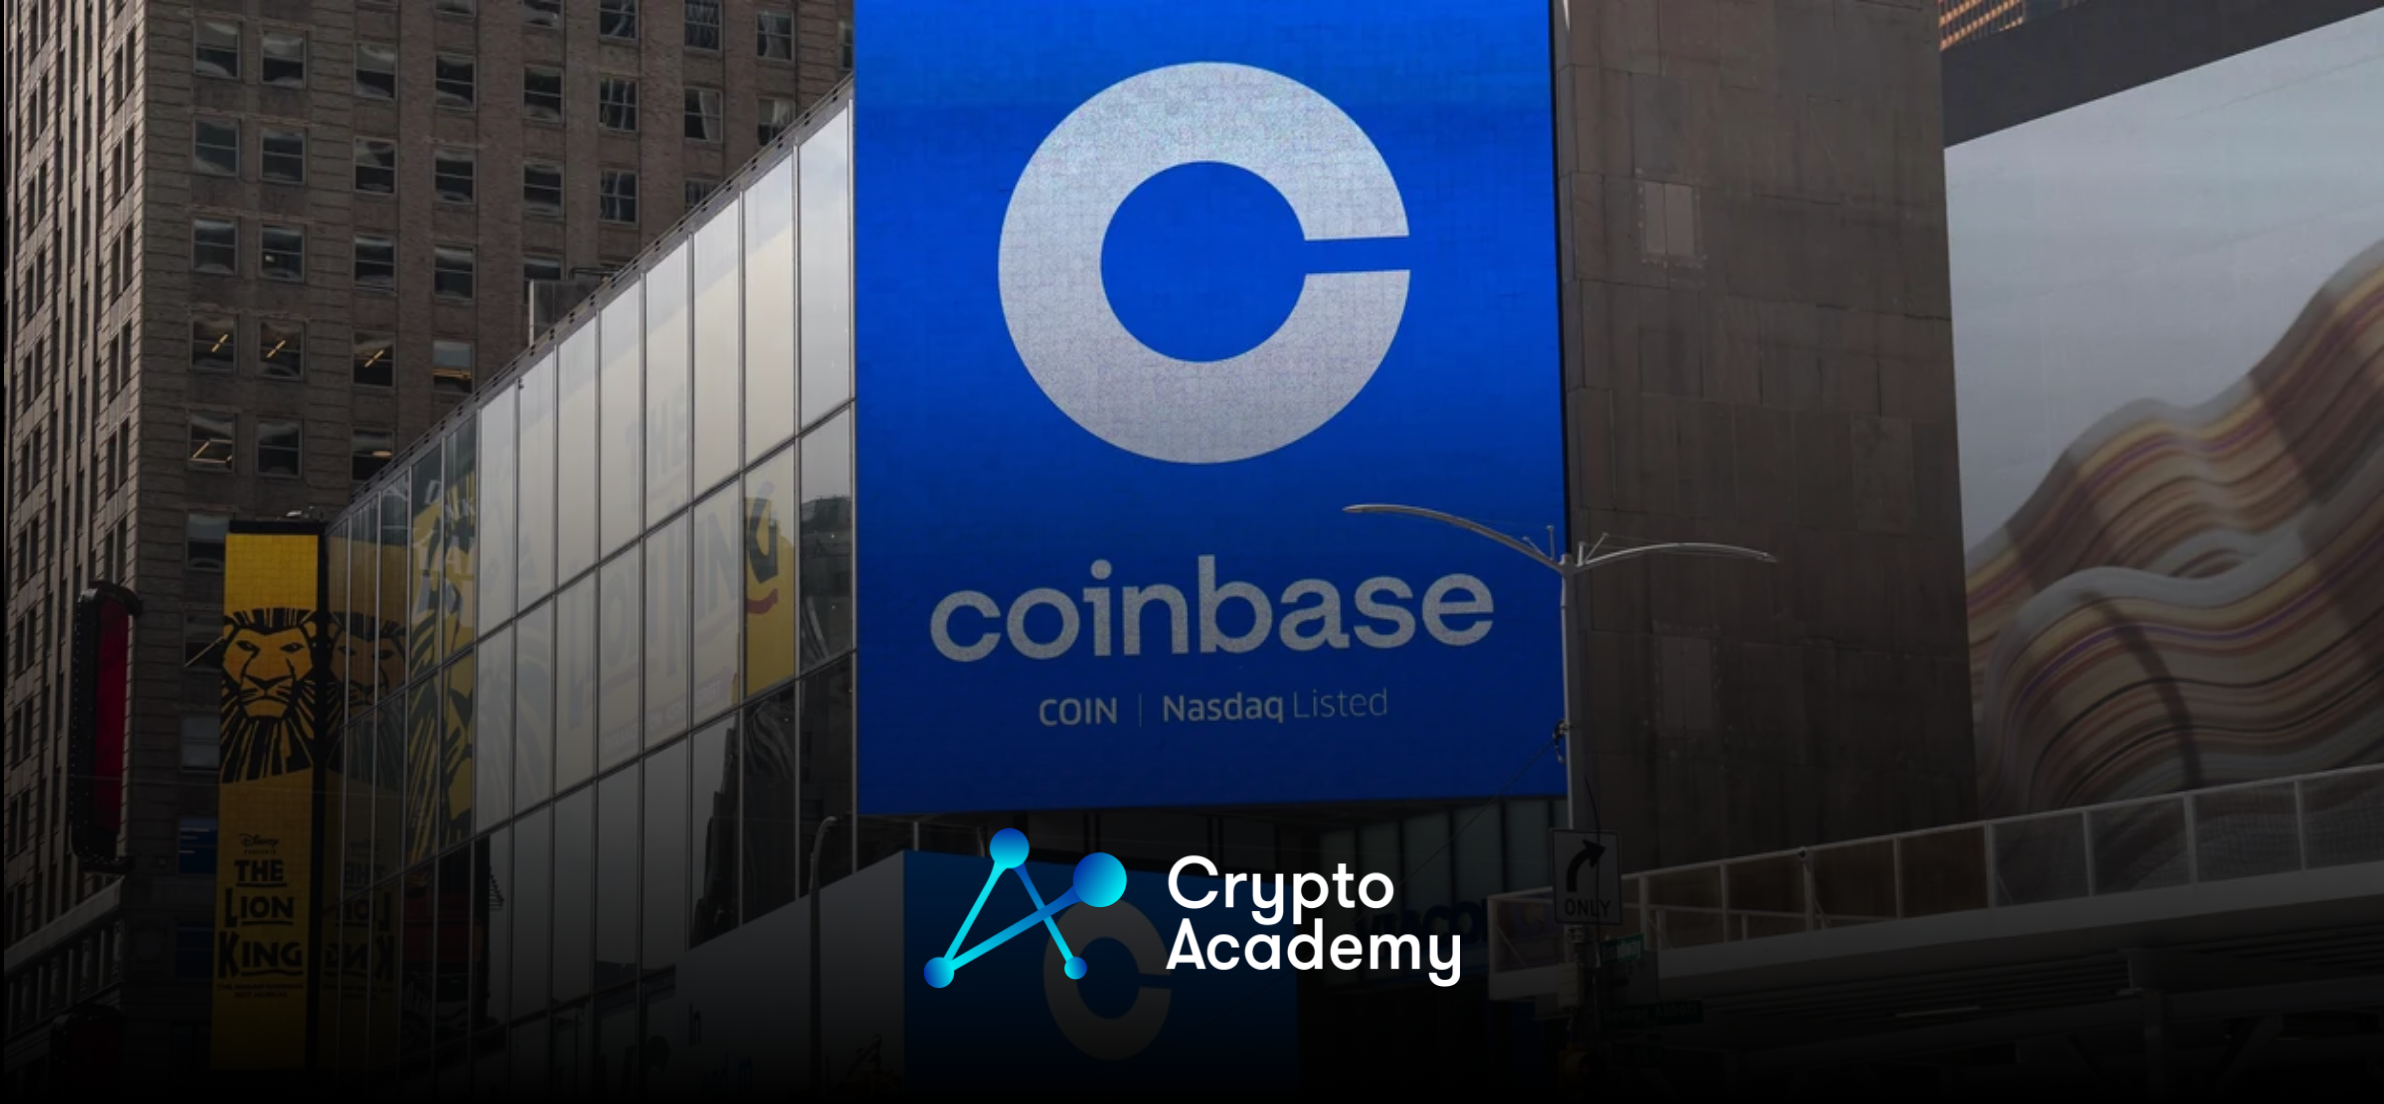 Coinbase Secures Singapore License